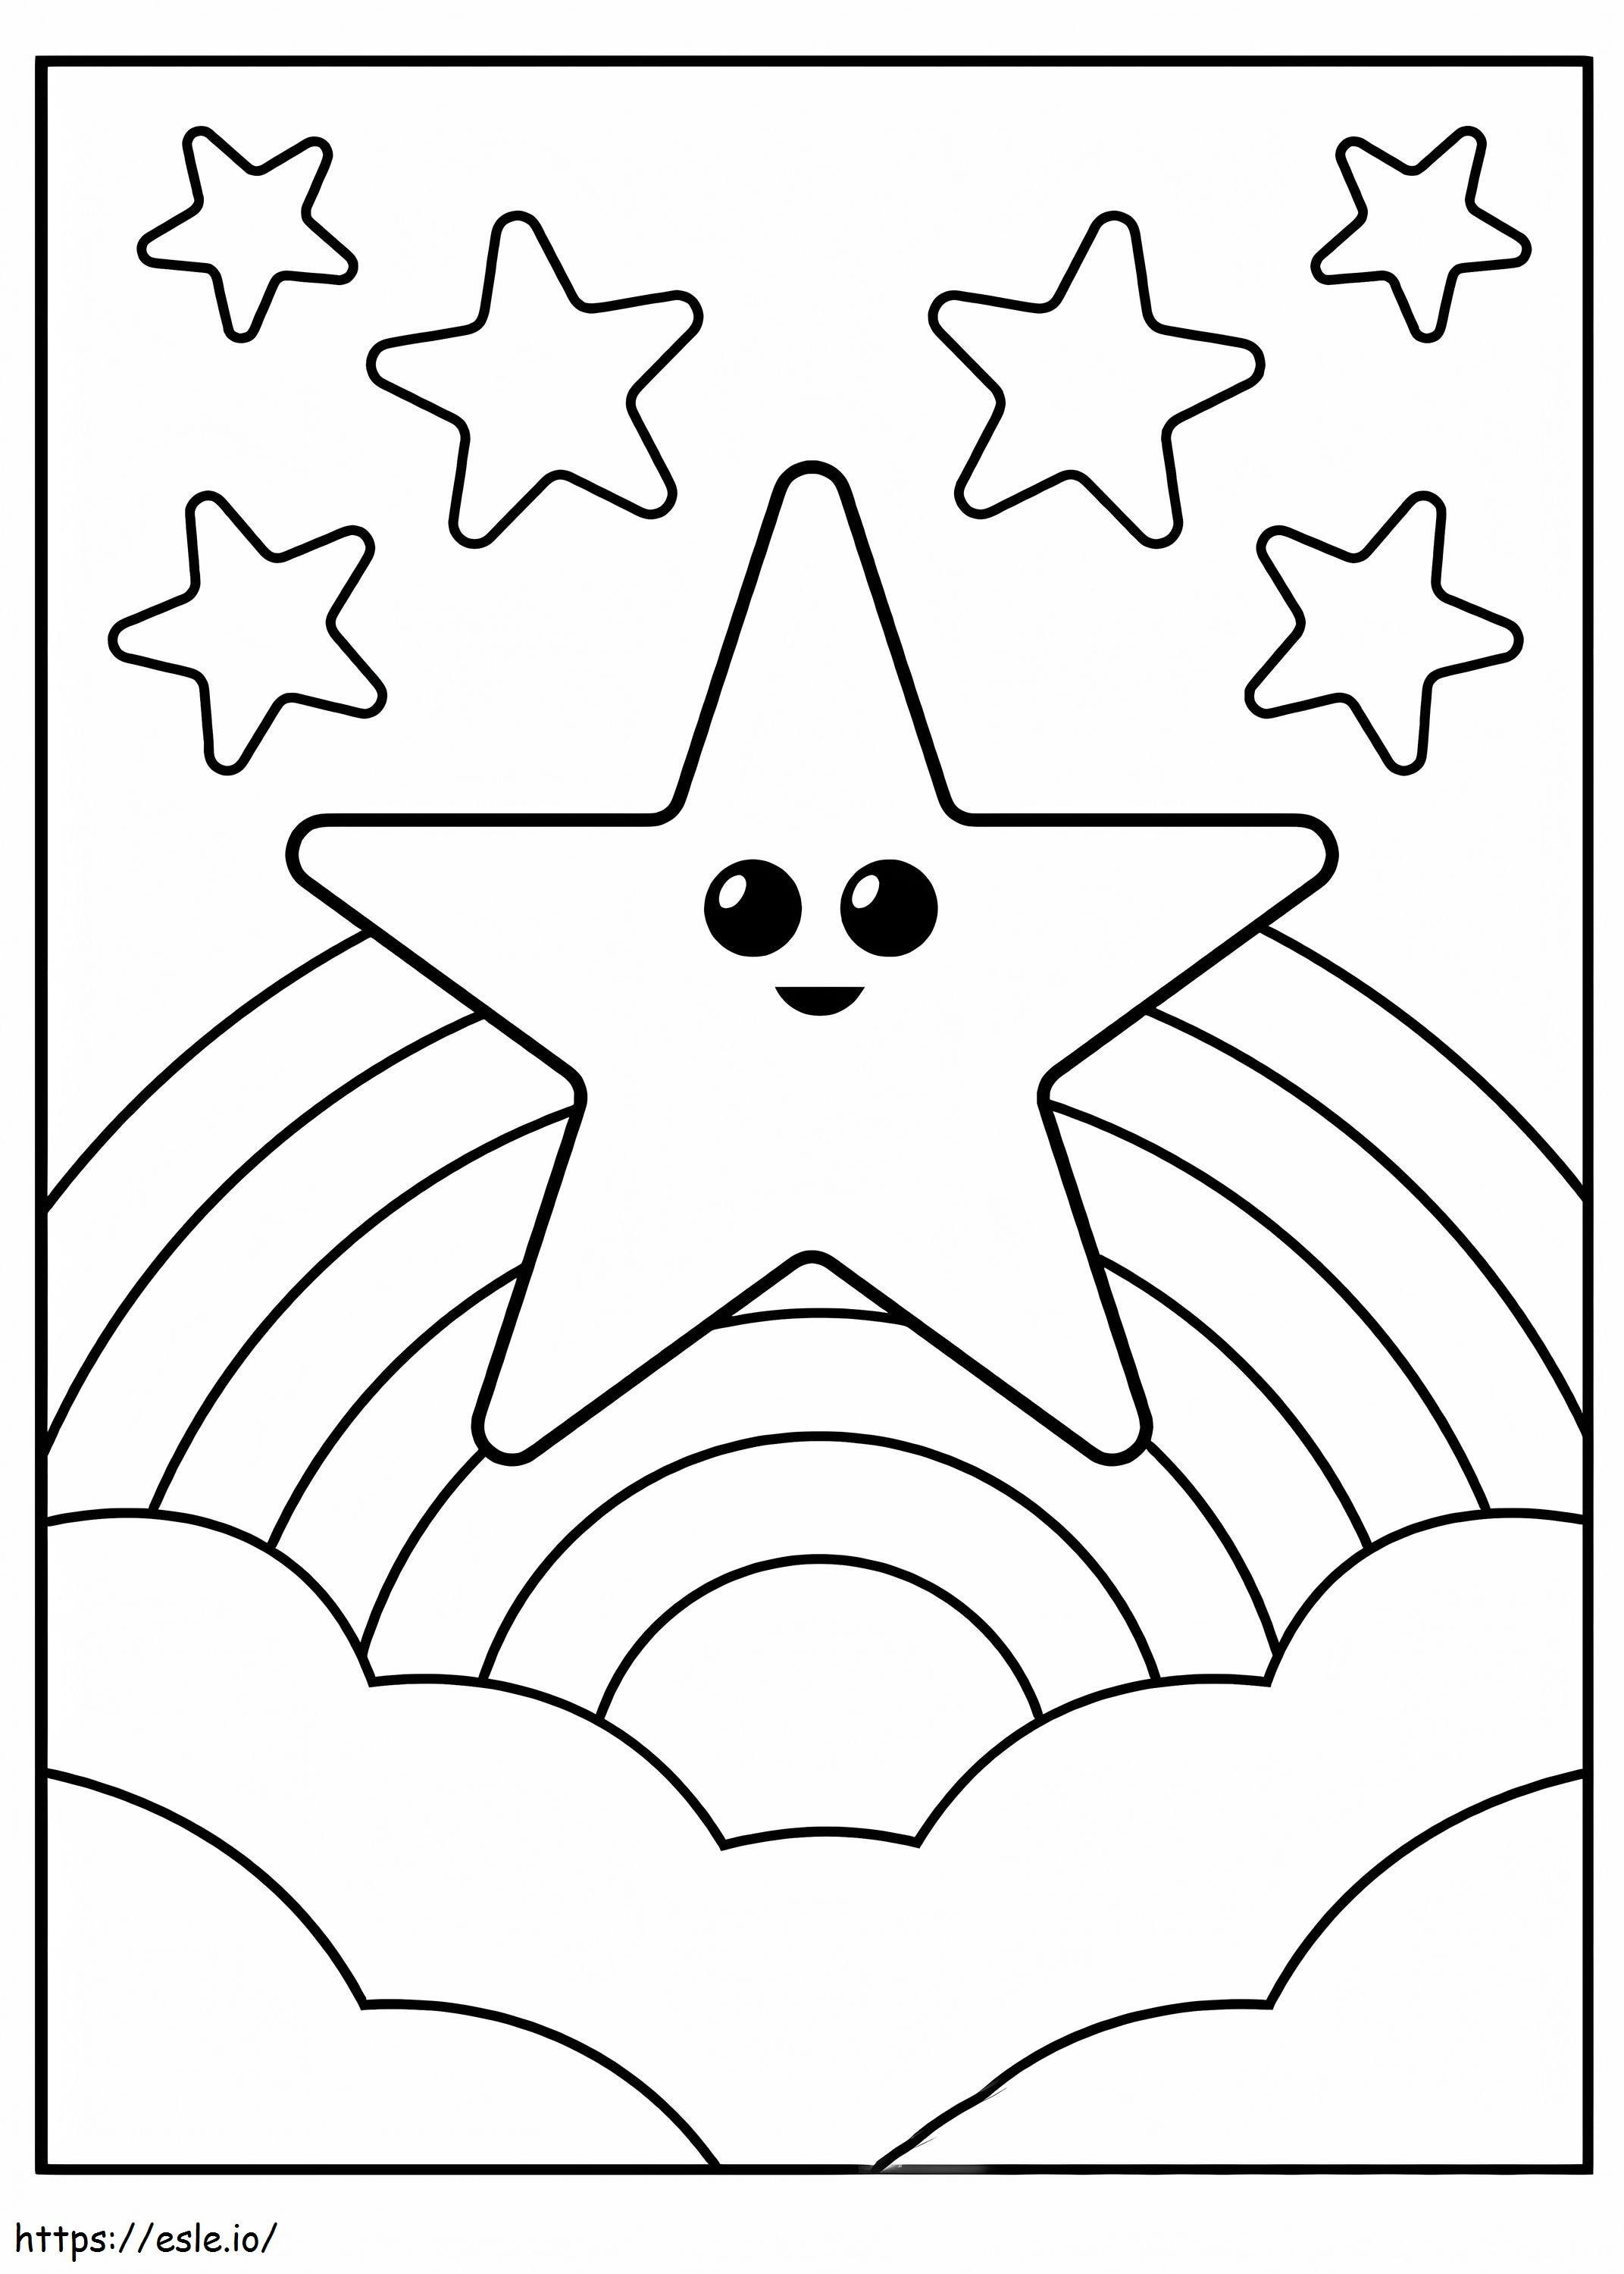 Good Star coloring page